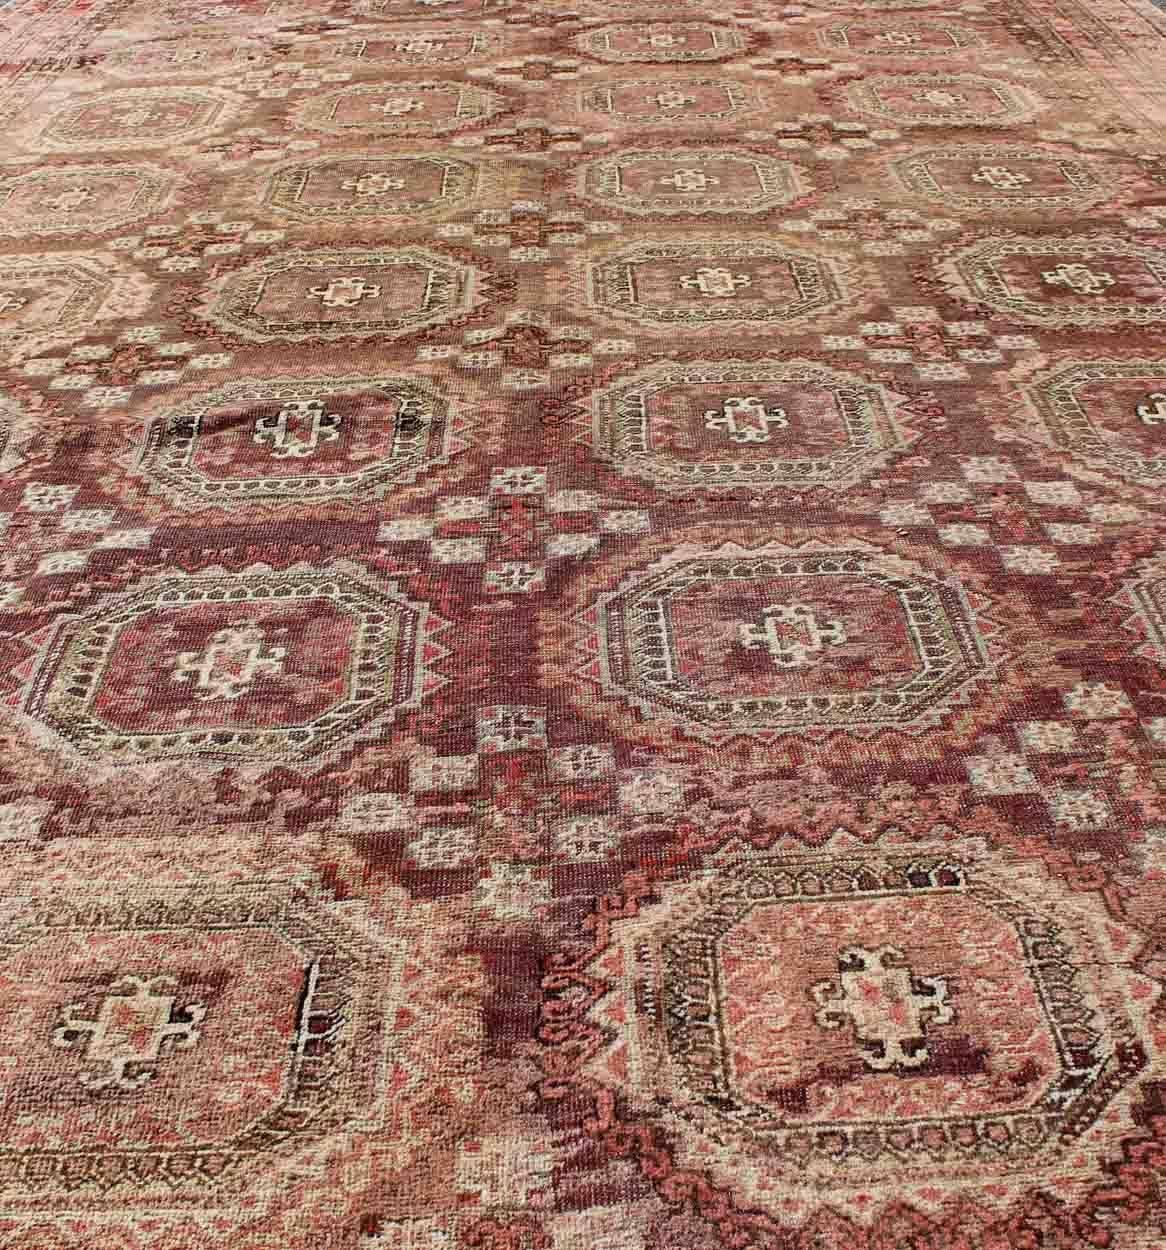 Antique Large Khotan Rug with Repeating Medallion Design in Maroon / Red In Good Condition For Sale In Atlanta, GA